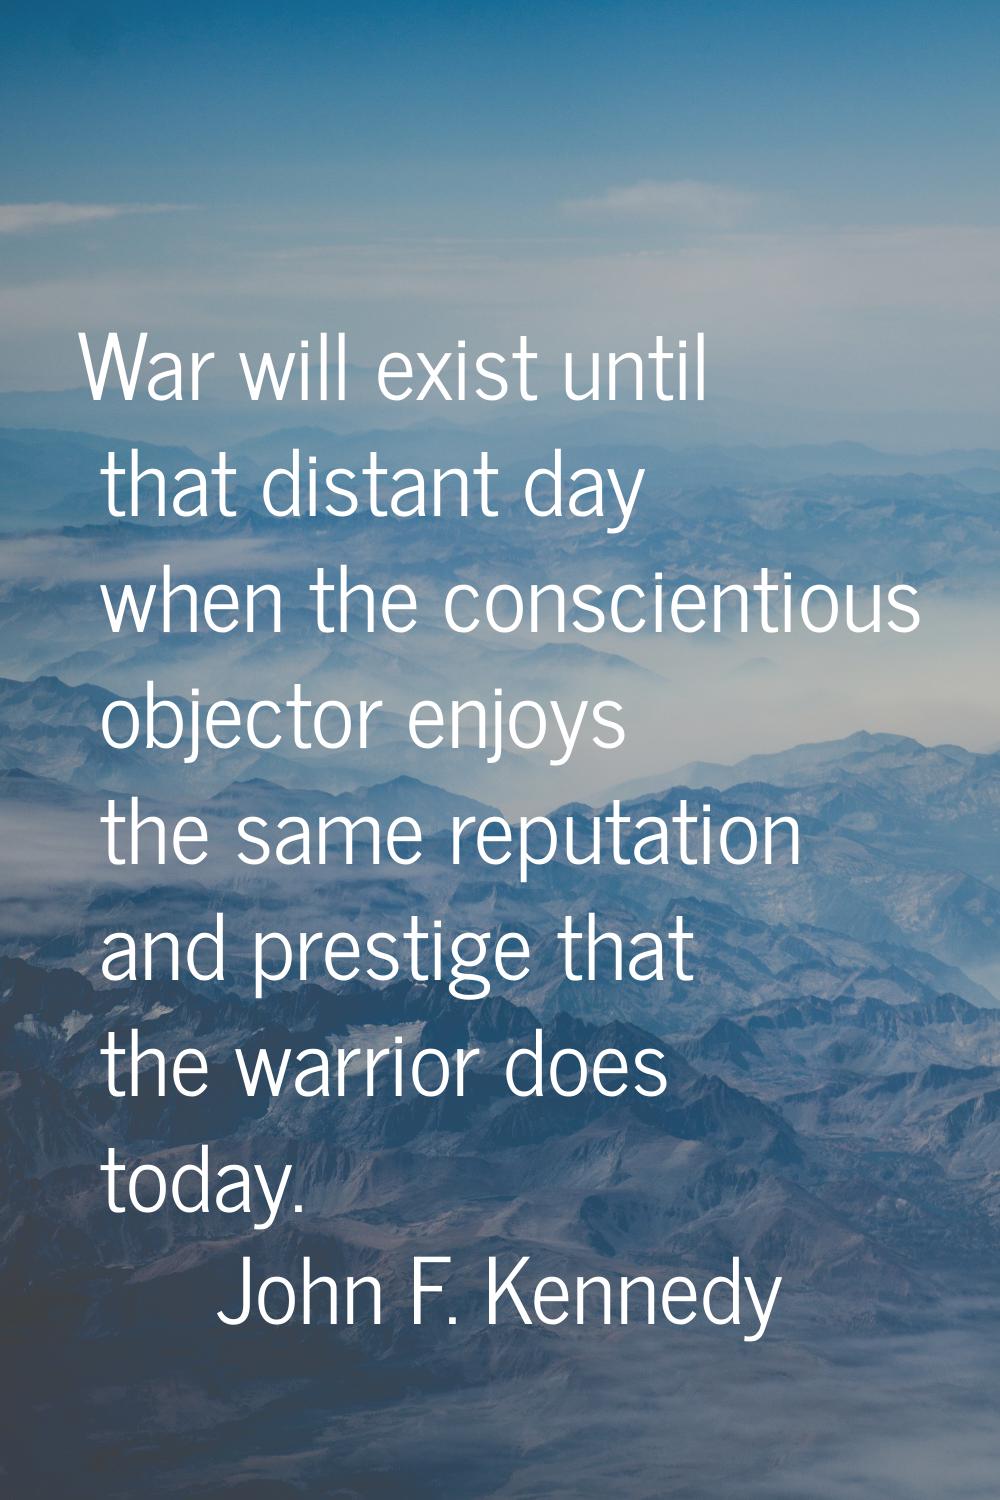 War will exist until that distant day when the conscientious objector enjoys the same reputation an